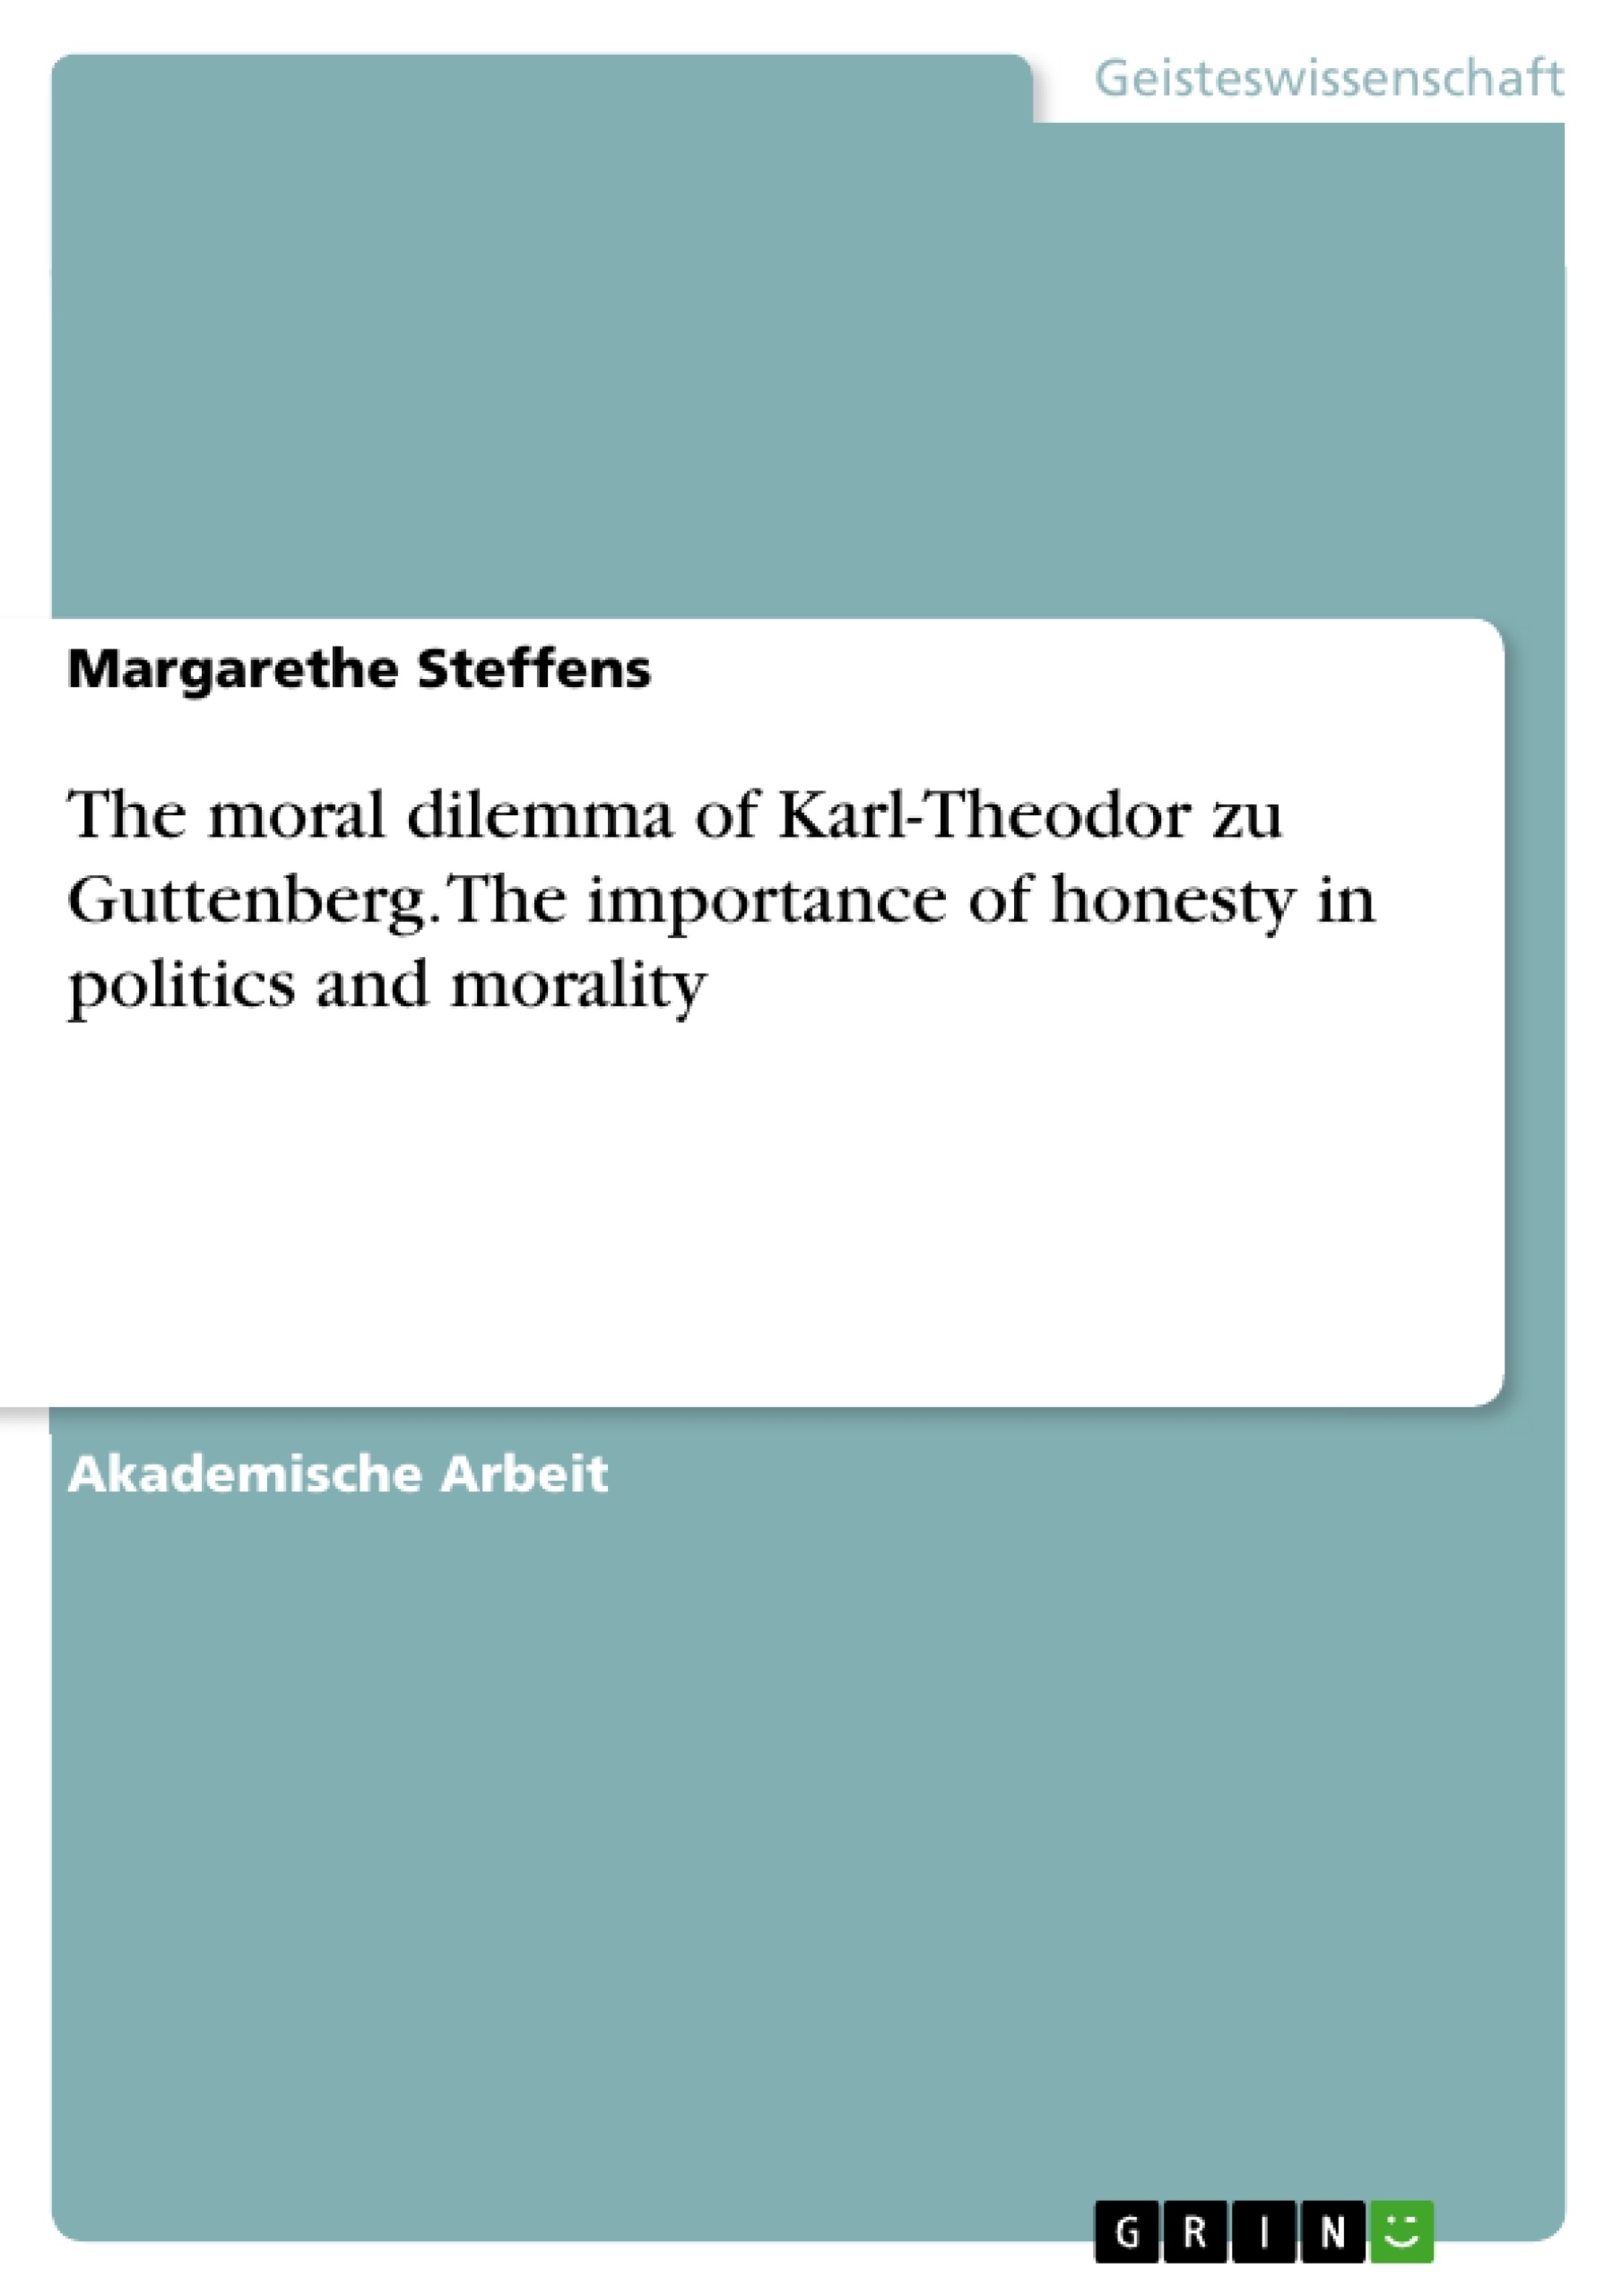 Título: The moral dilemma of Karl-Theodor zu Guttenberg. The importance of honesty in politics and morality